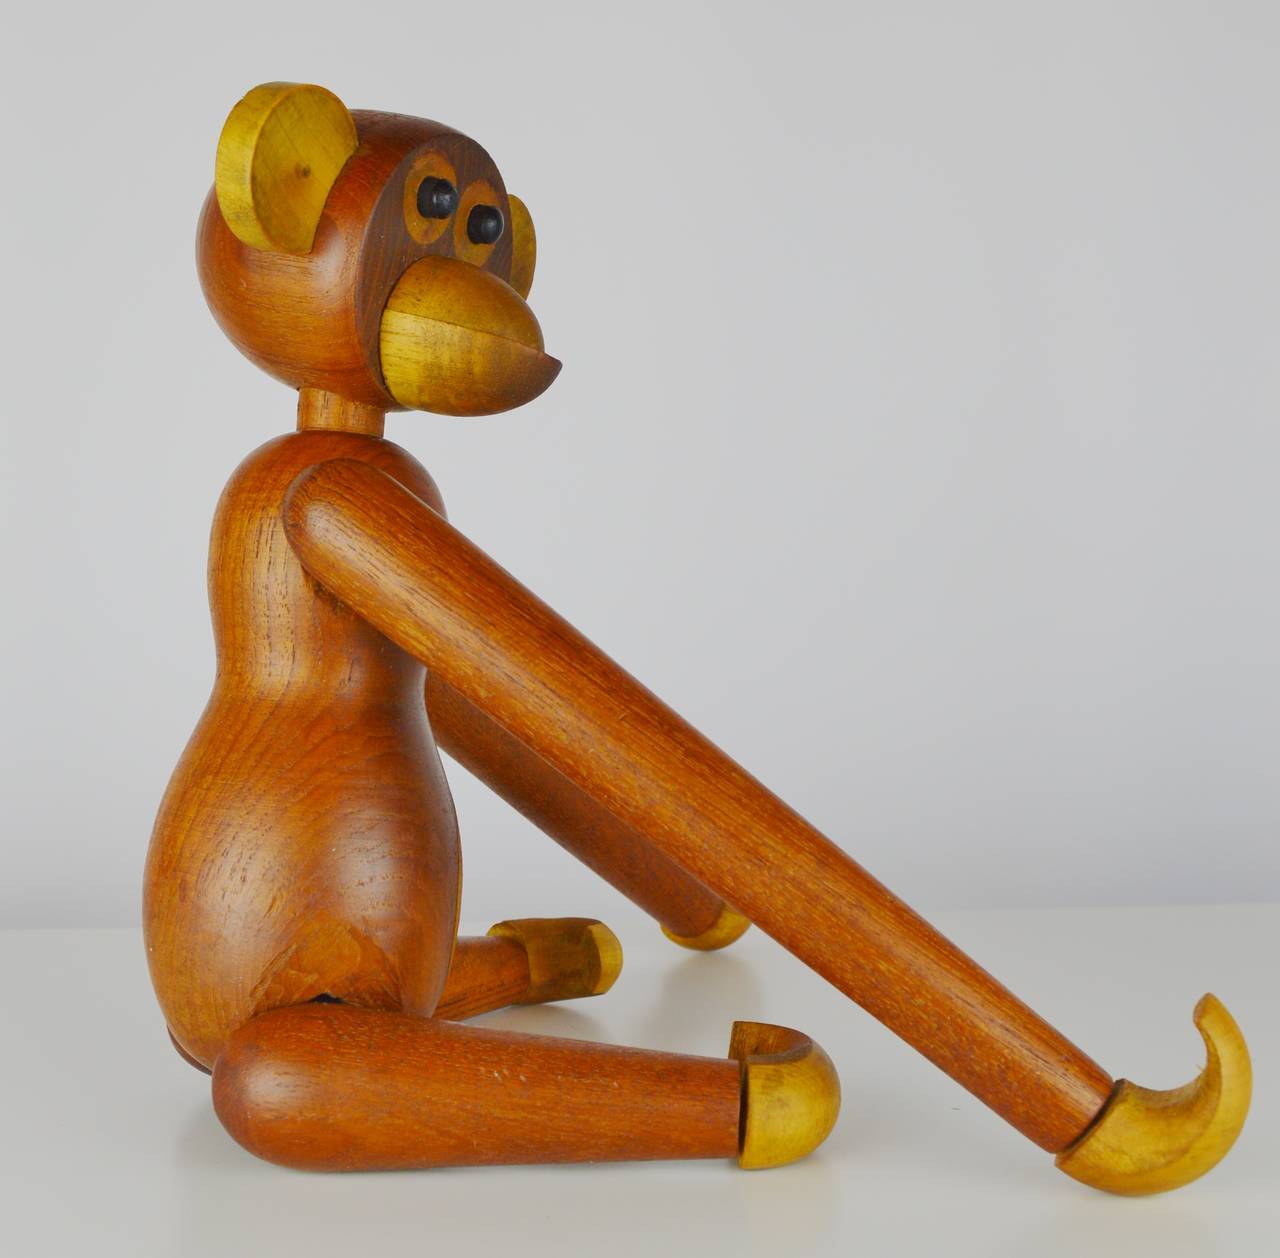 These adorable vintage articulated monkeys originated in Denmark in the 1950s and were copied by others around the world as they are so delightful to children and adults alike as both toys and cherished collectables! The large monkey is mostly teak